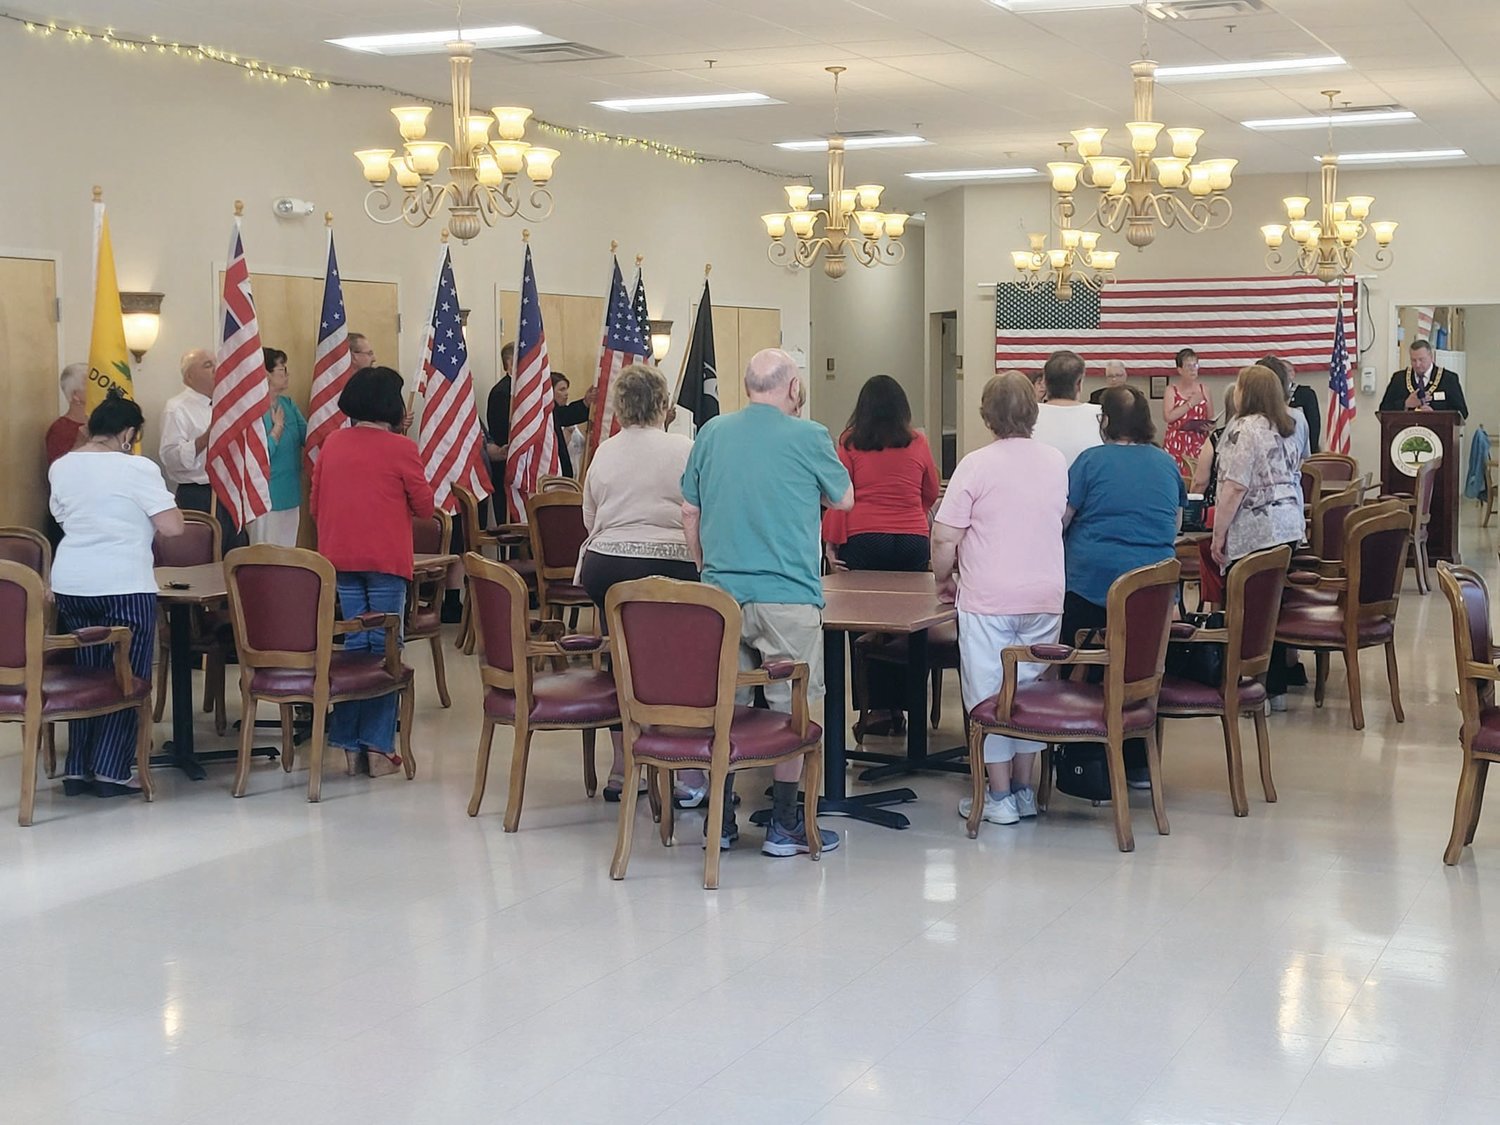 THE FLAG THAT UNITES US: Officers and members of Warwick’s Tri-City Elks Lodge led songs and delivered readings during a Flag Day ritual held Tuesday for the members of the Johnston Senior Center.